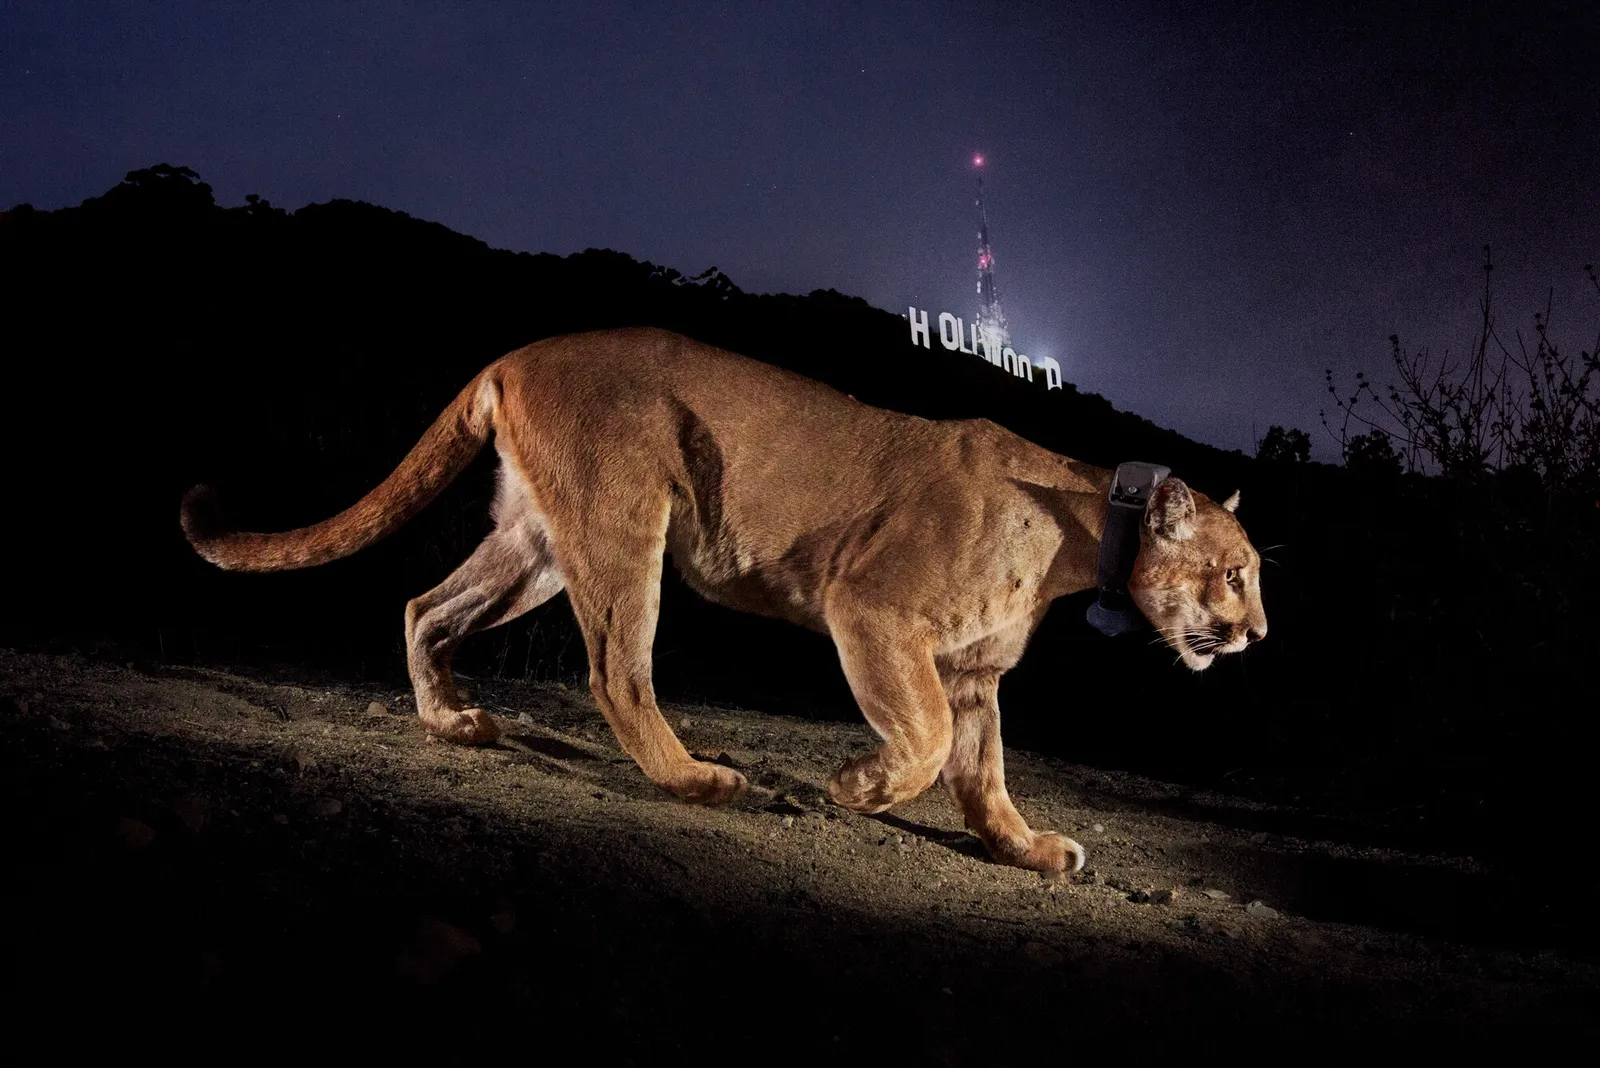 a remote camera trap photo of a mountain lion walking through an area at night with the Hollywood Sign lit up behind it